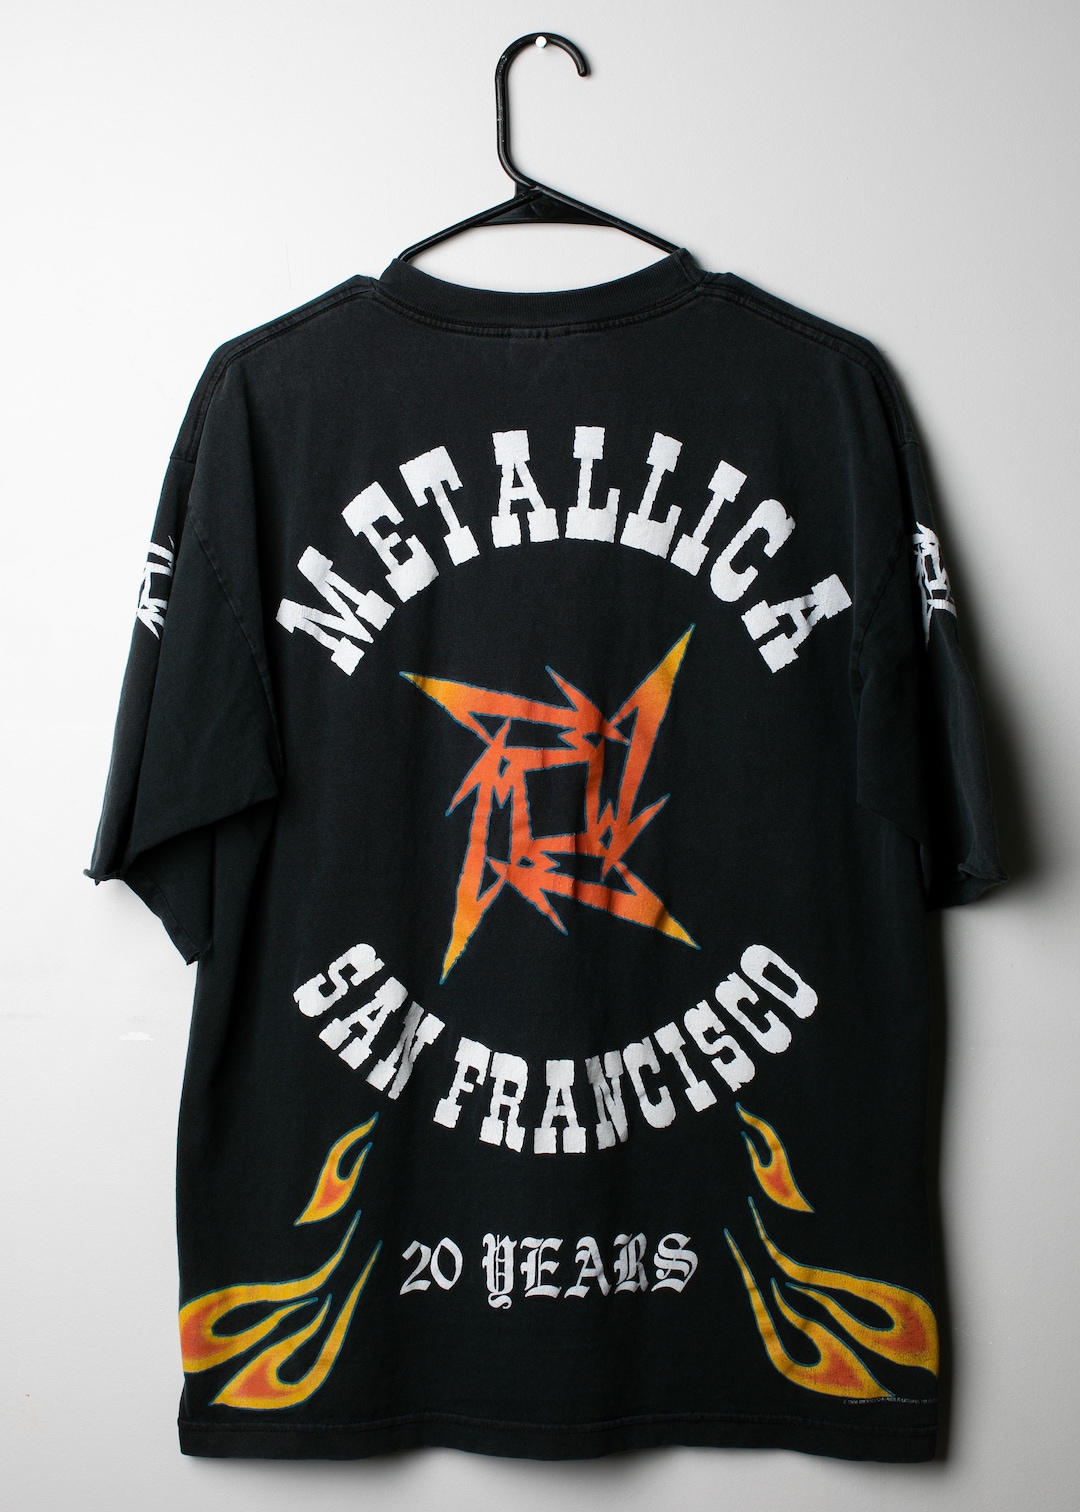 EXTREMELY RARE Metallica San Francisco Made in L.A. '81 